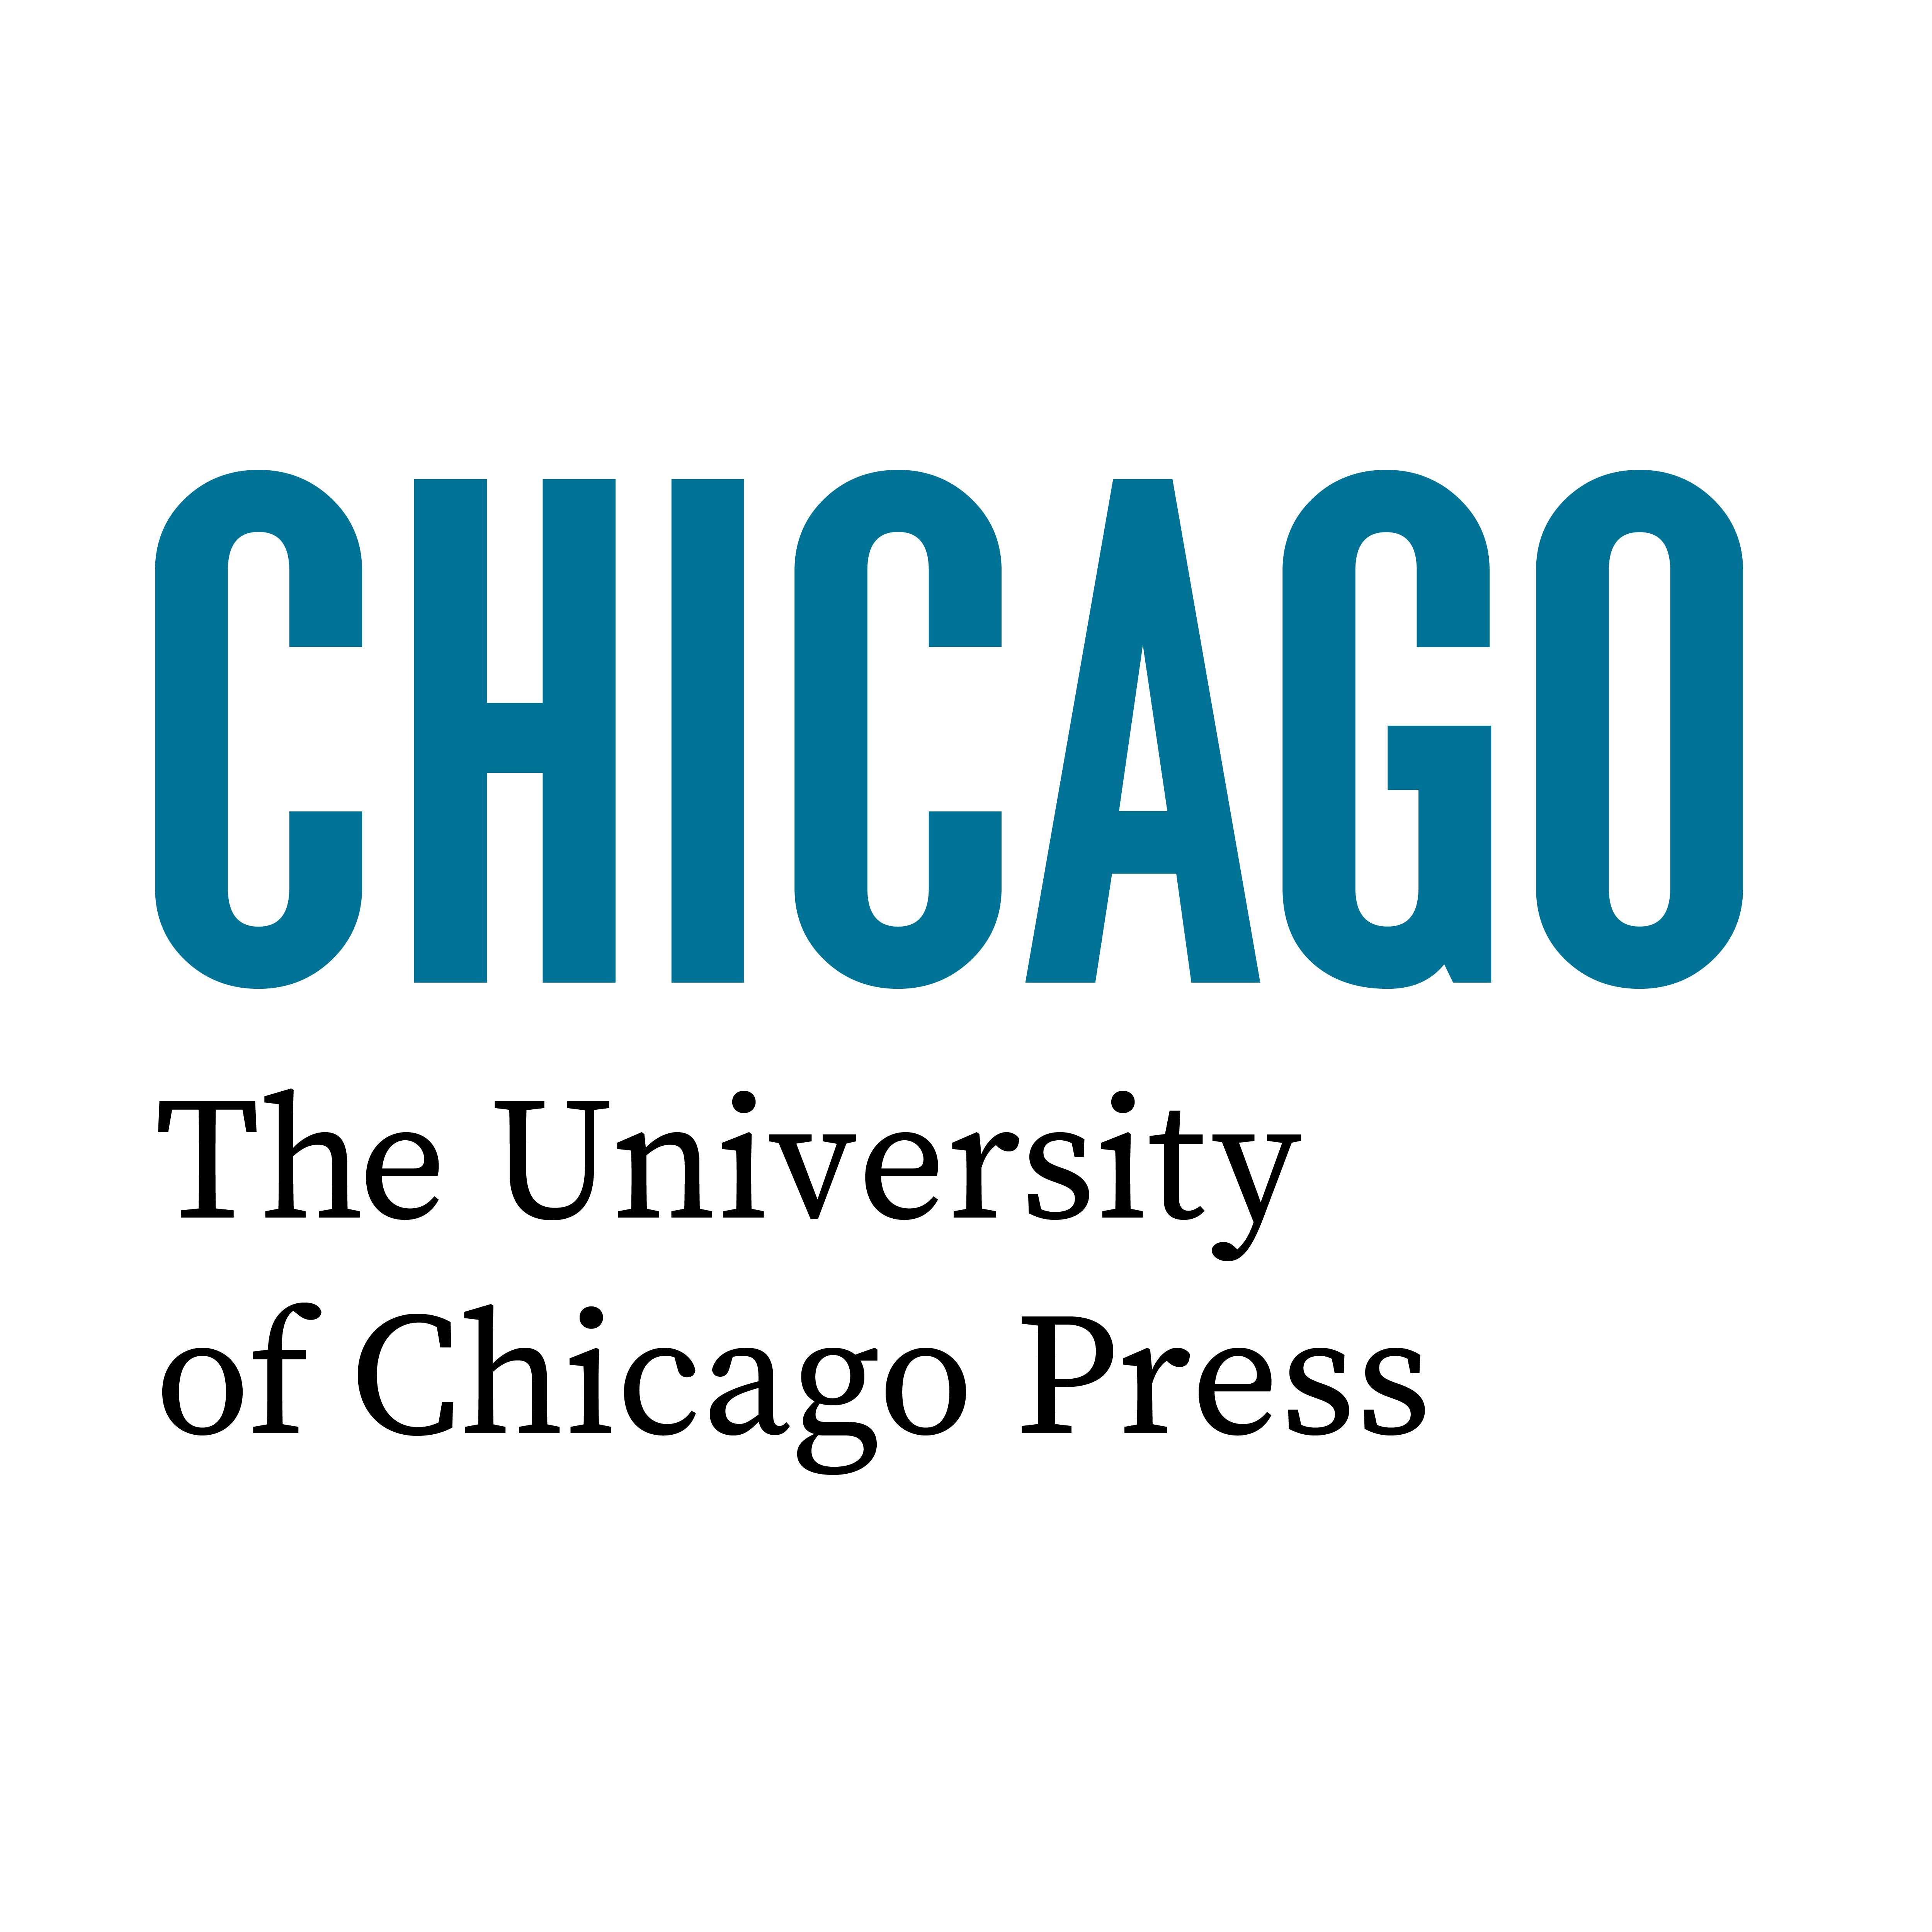 a style published by the chicago university press